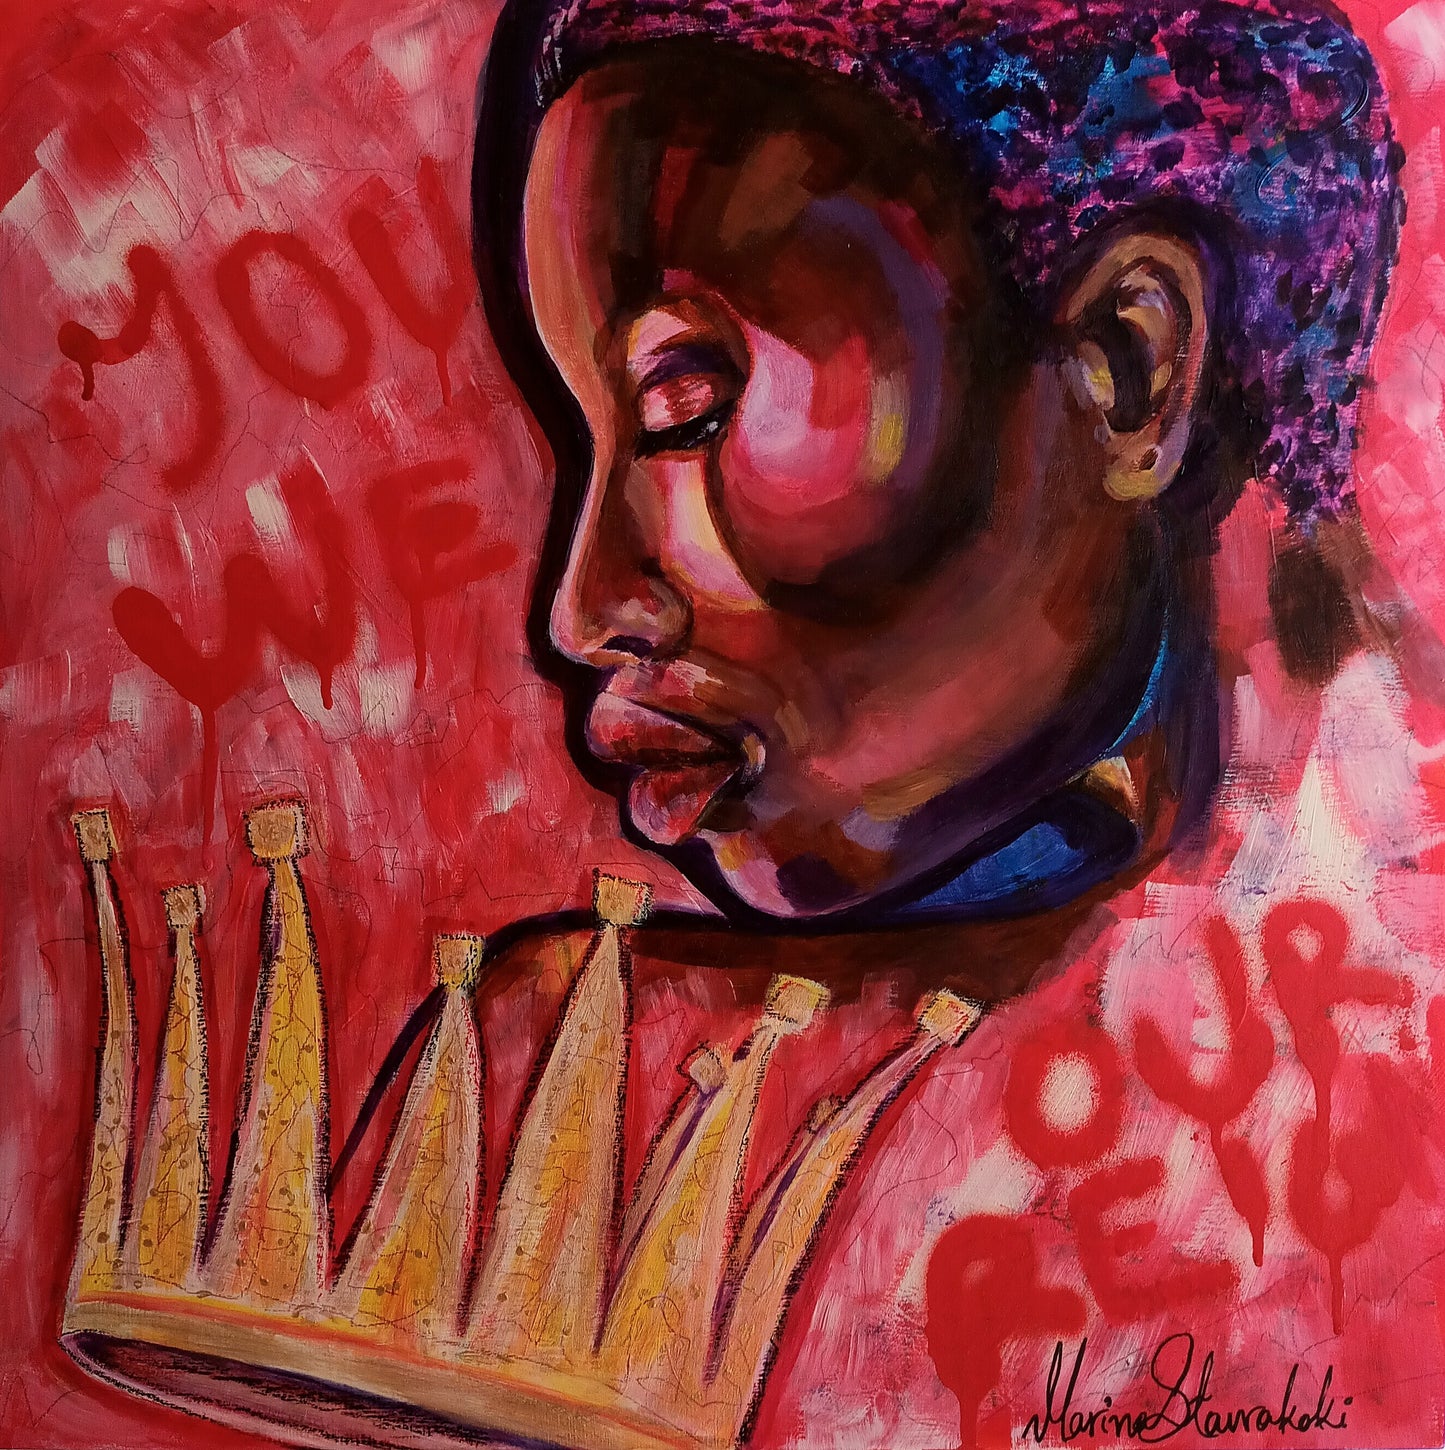 "You always wore the crown" Original Painting